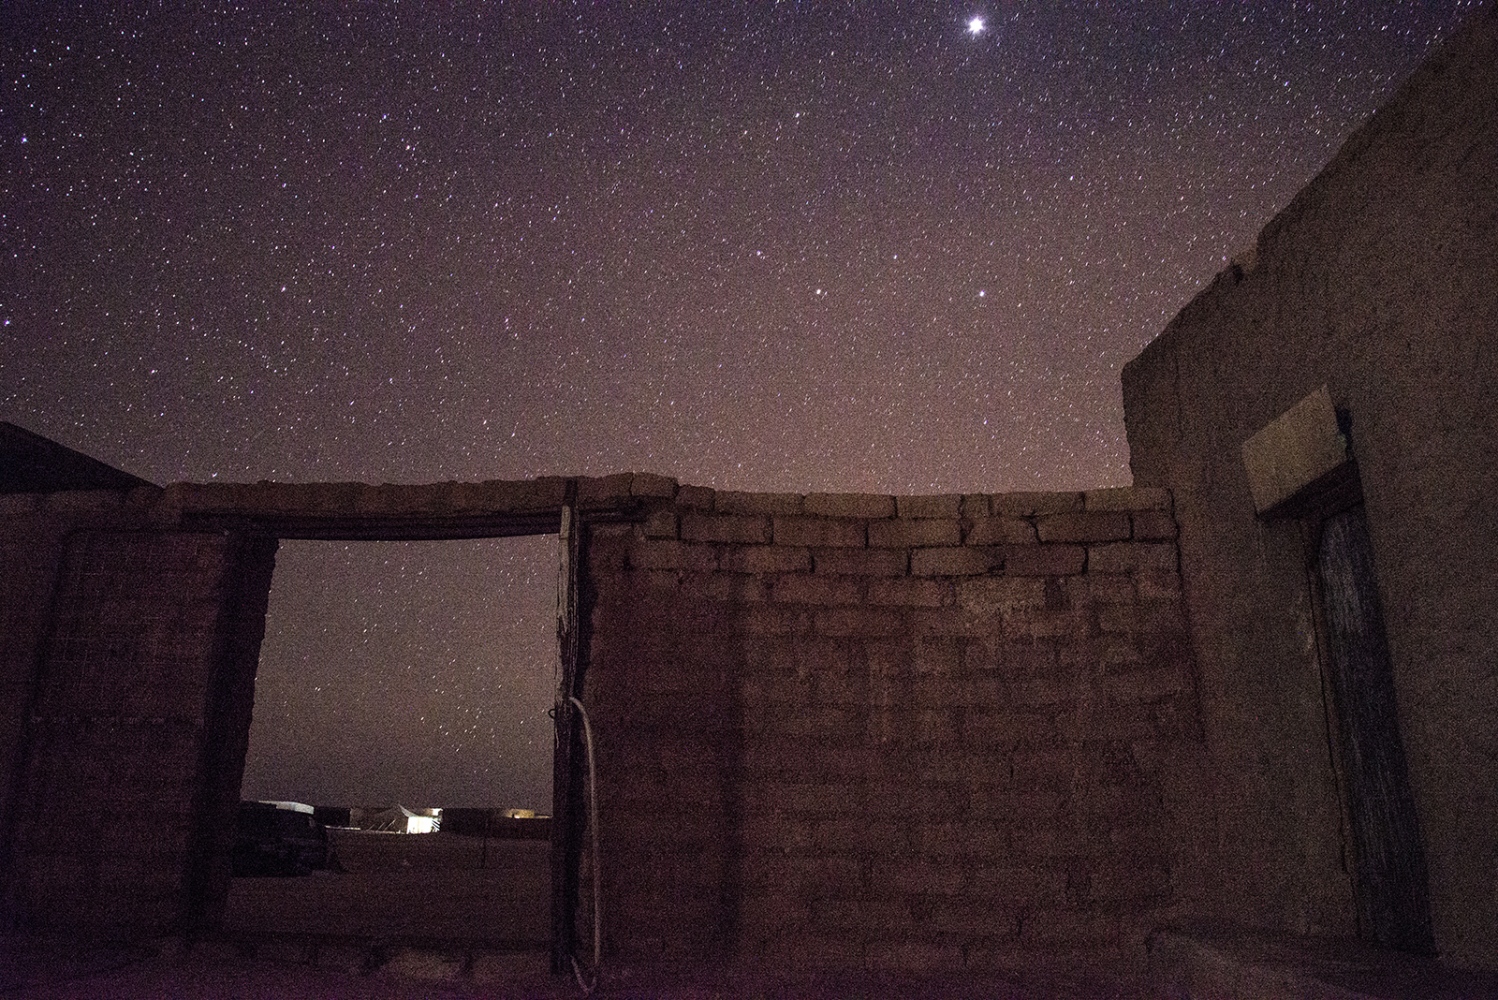 Behind The Wall, life of the Sahrawi -  Smara by night. The Sahrawi refugee camps have one of...